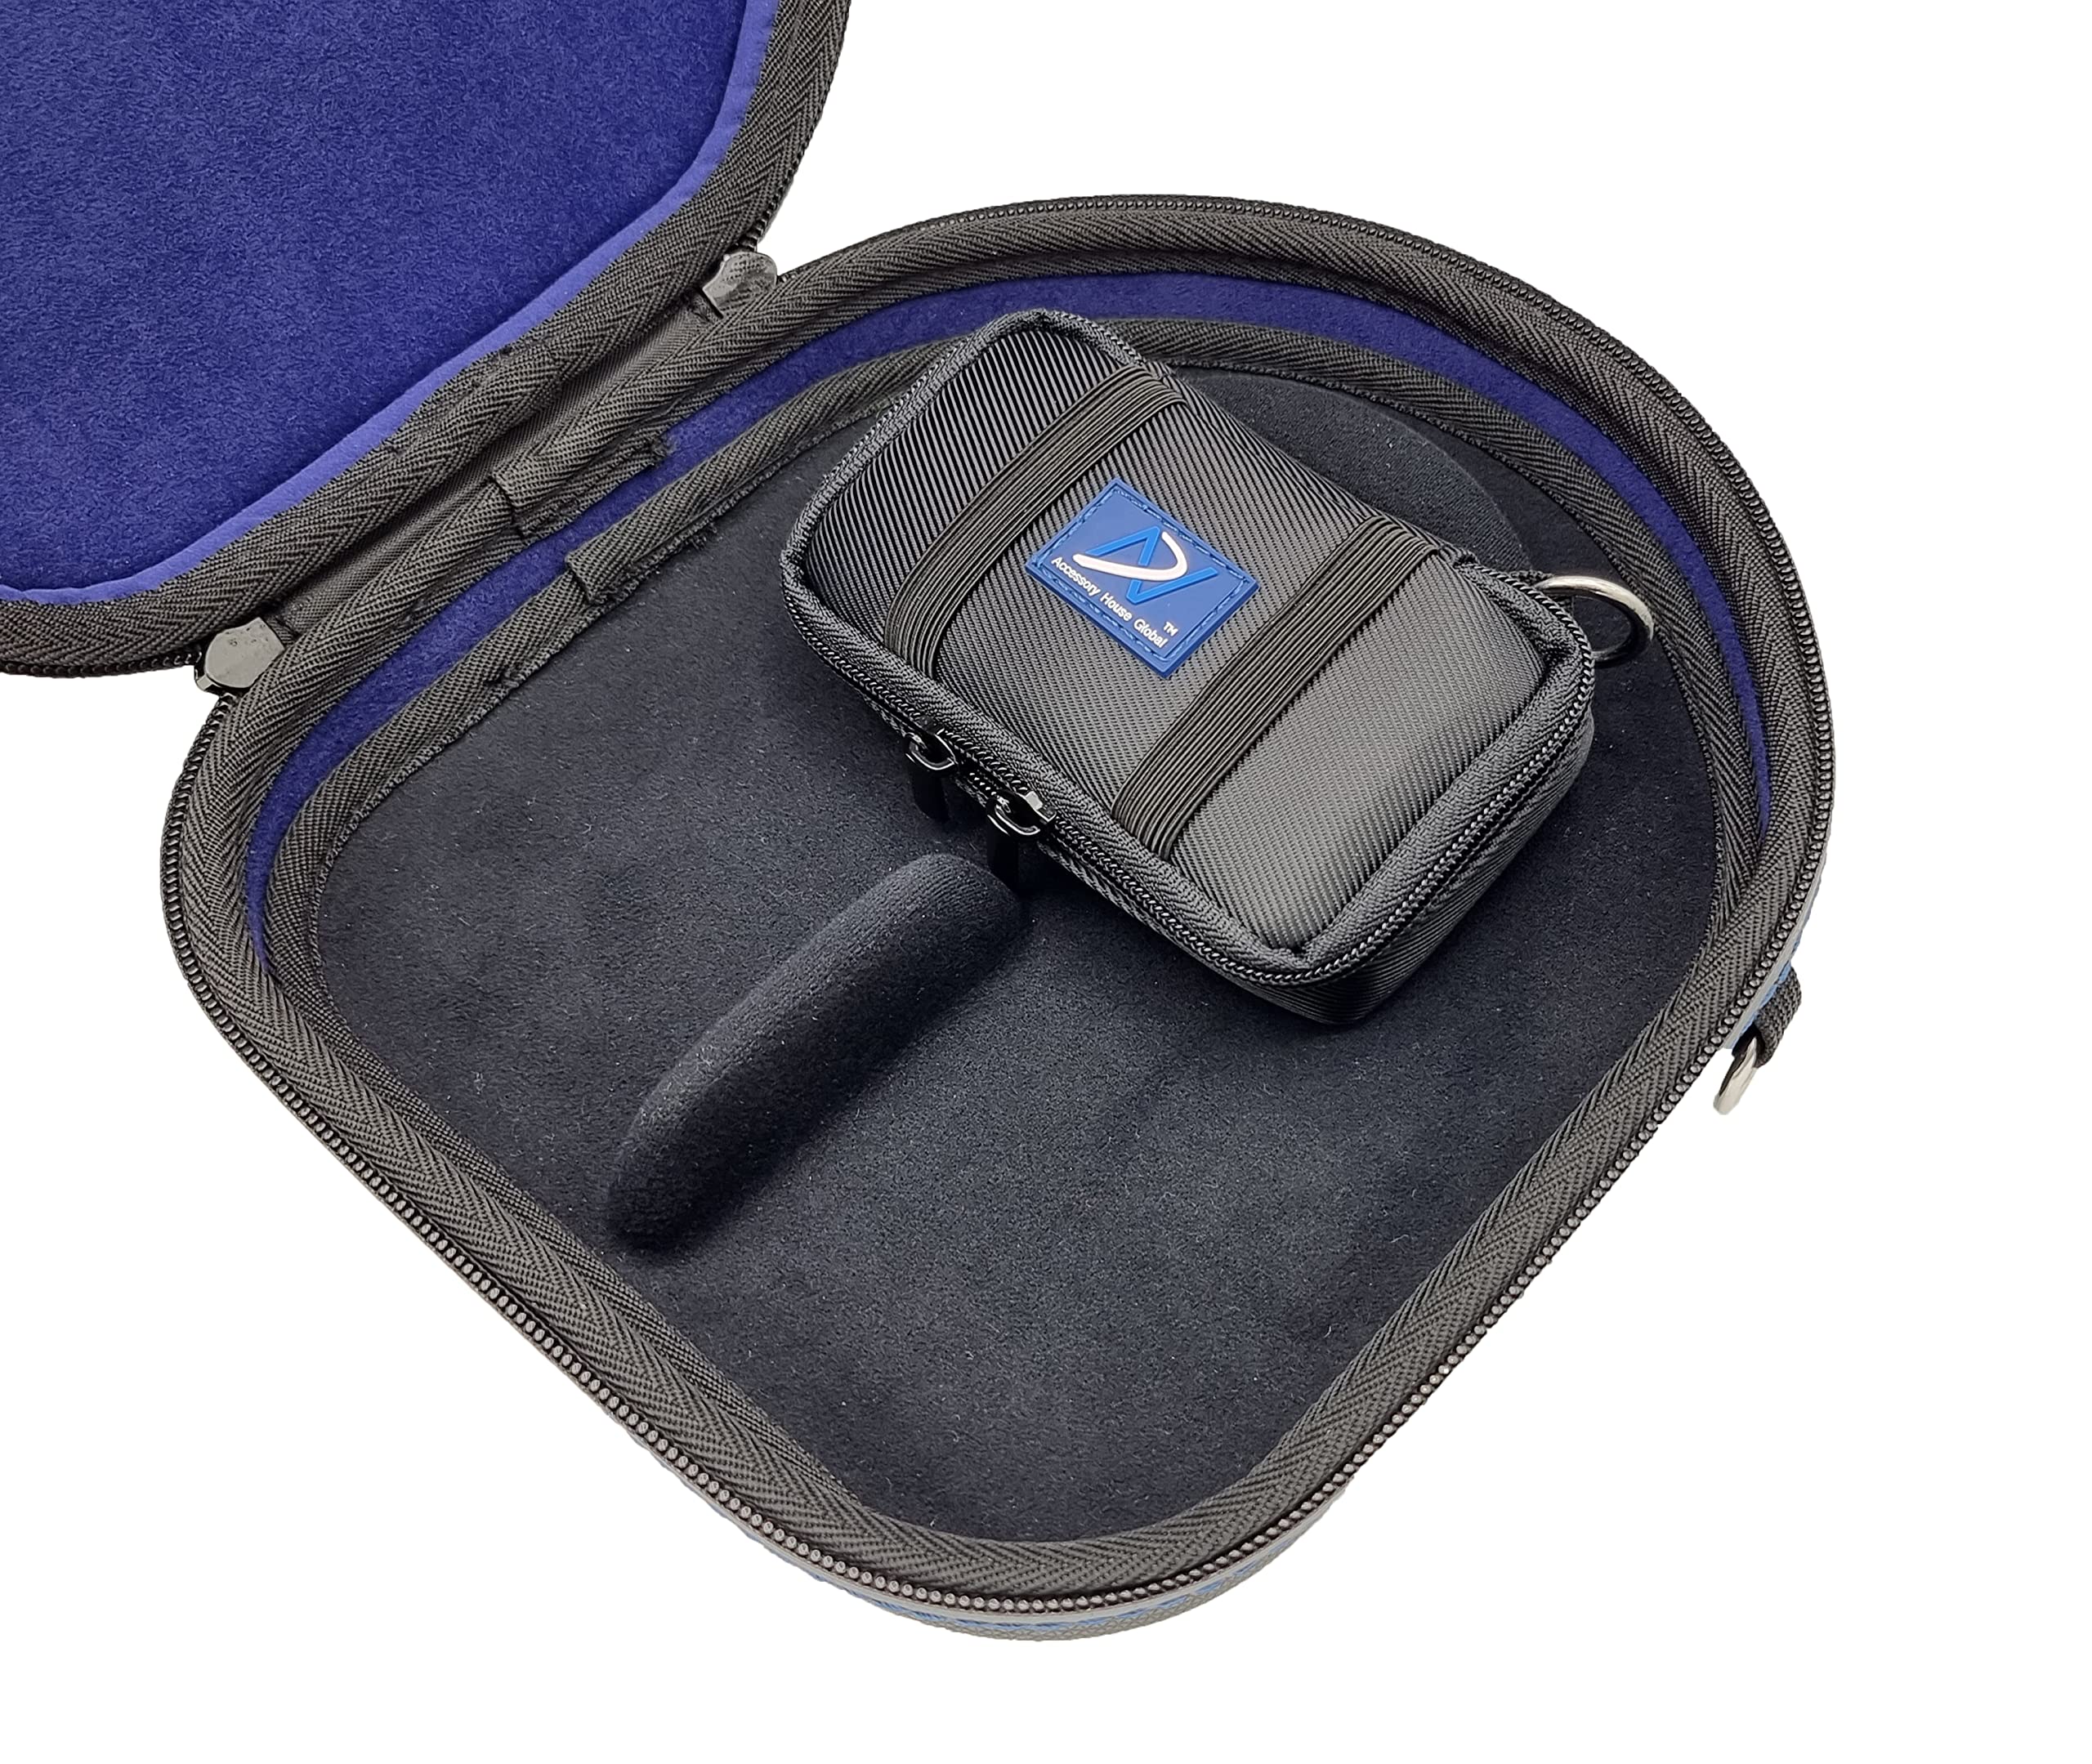 Premium Carrying case Compatible with Grado SR60 SR80 SR125 SR225 SR325, RS1 RS2, Alessandro MS-, PS500e, GH1 GH2 GH3 GH4 and GW100 Headphones. Grip-TECH 2 Outer Liner Easy Transport